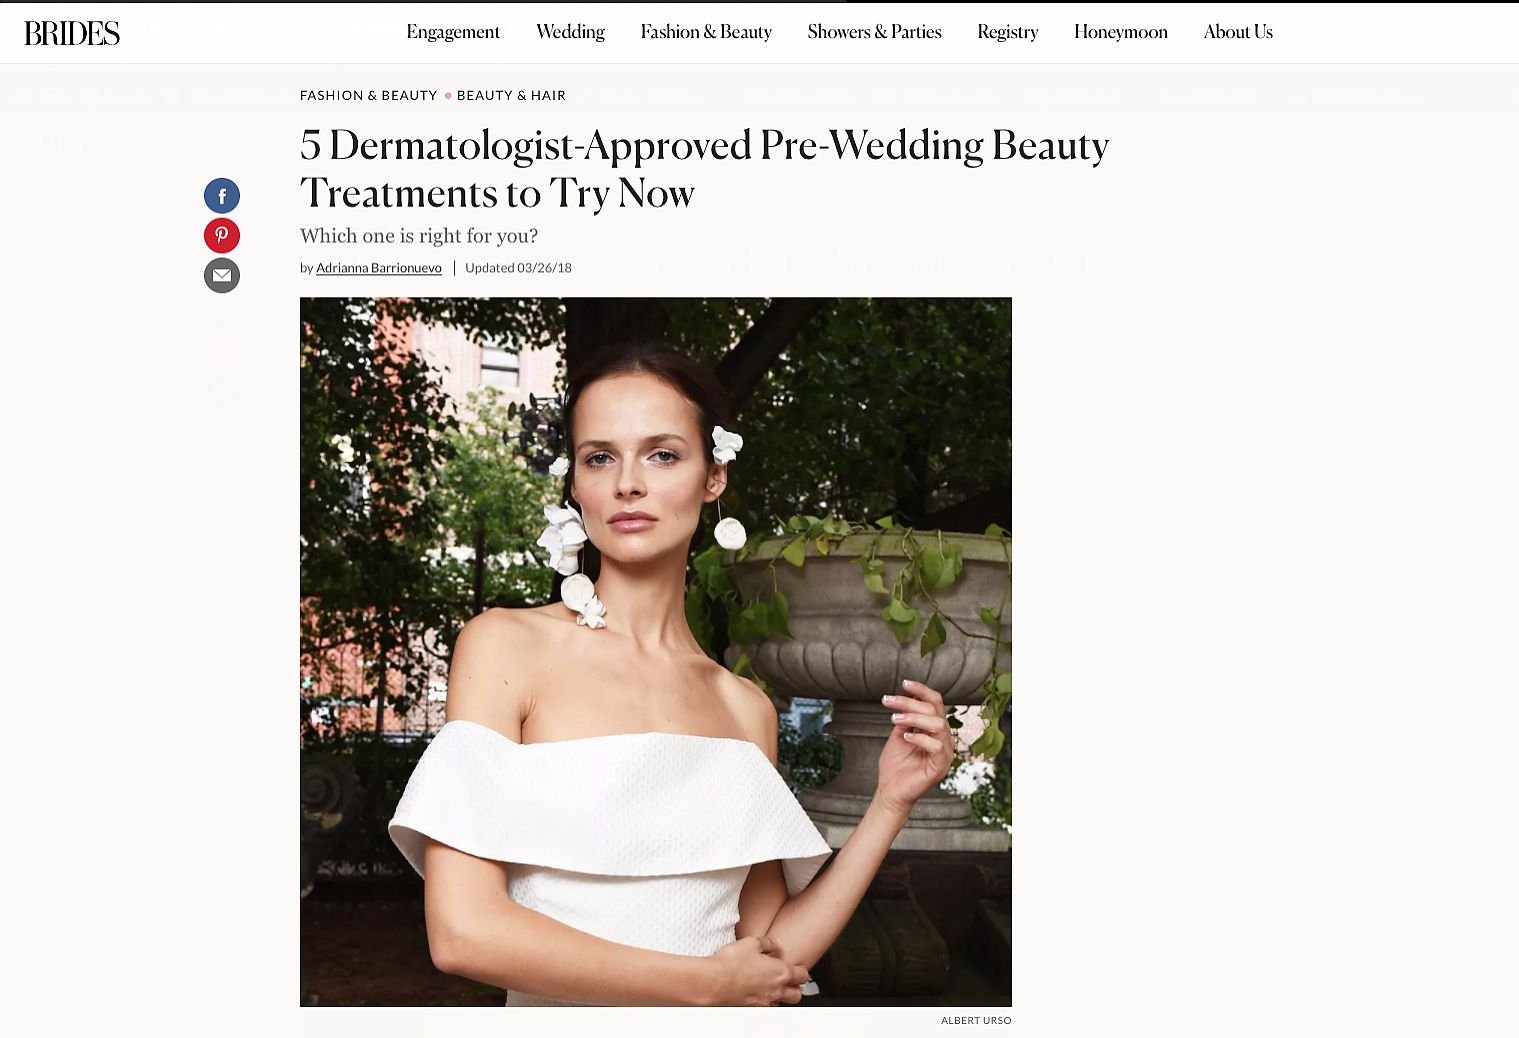 Your Dermatologist-Approved Timeline for Pre-Wedding Skin Treatments